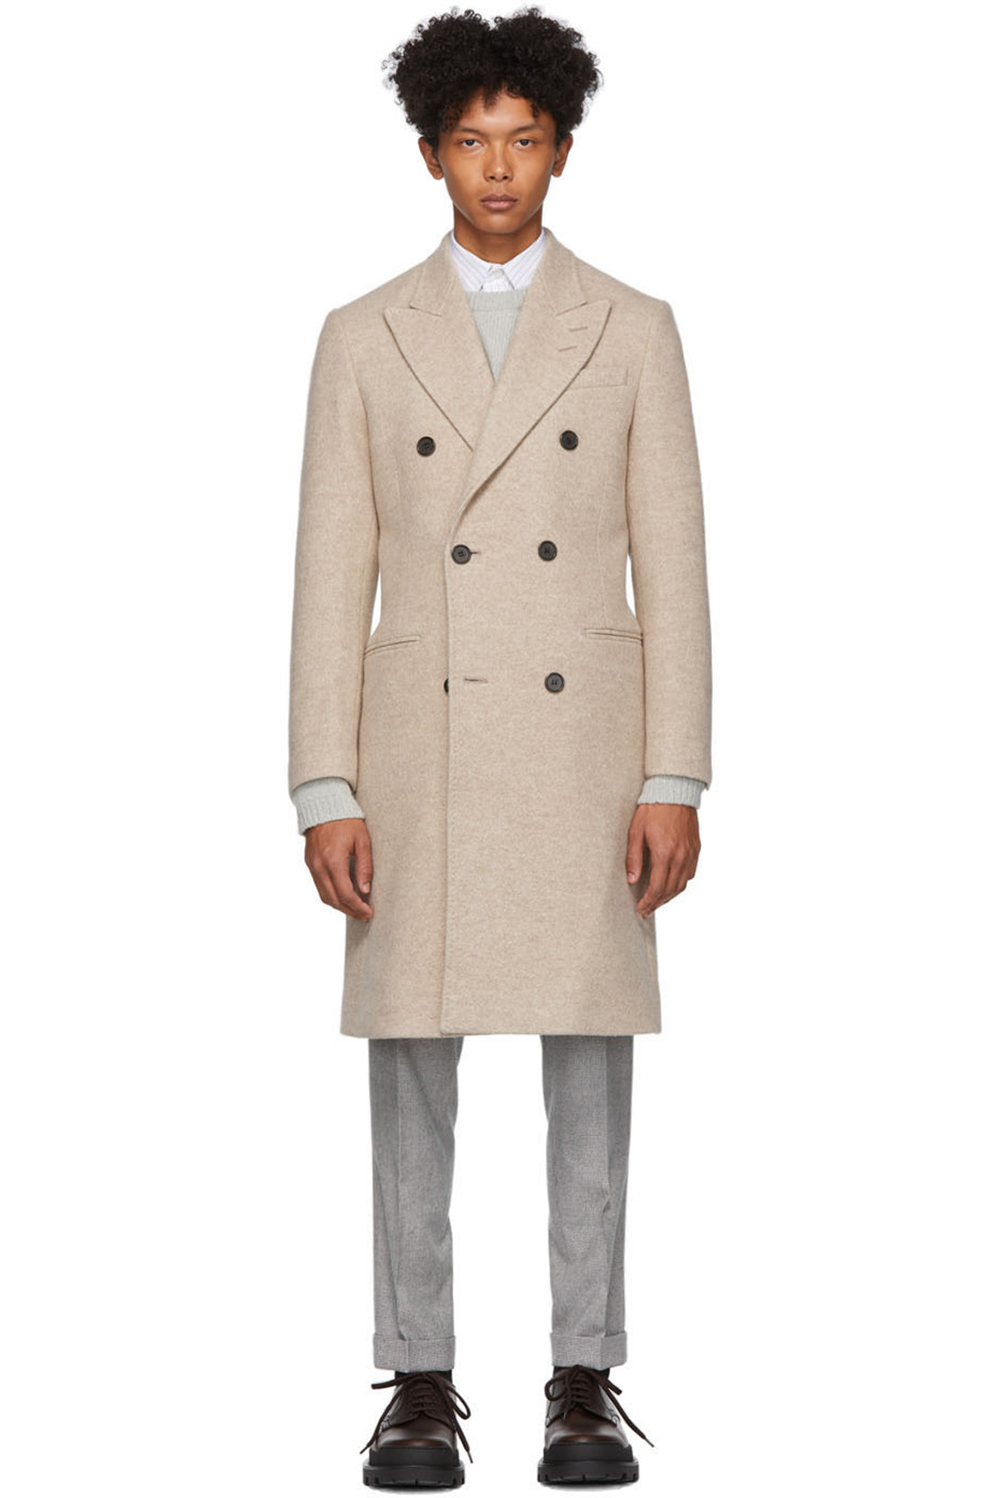 10 Topcoats Ready to Step Up Your Winter Style Game - Sharp Magazine